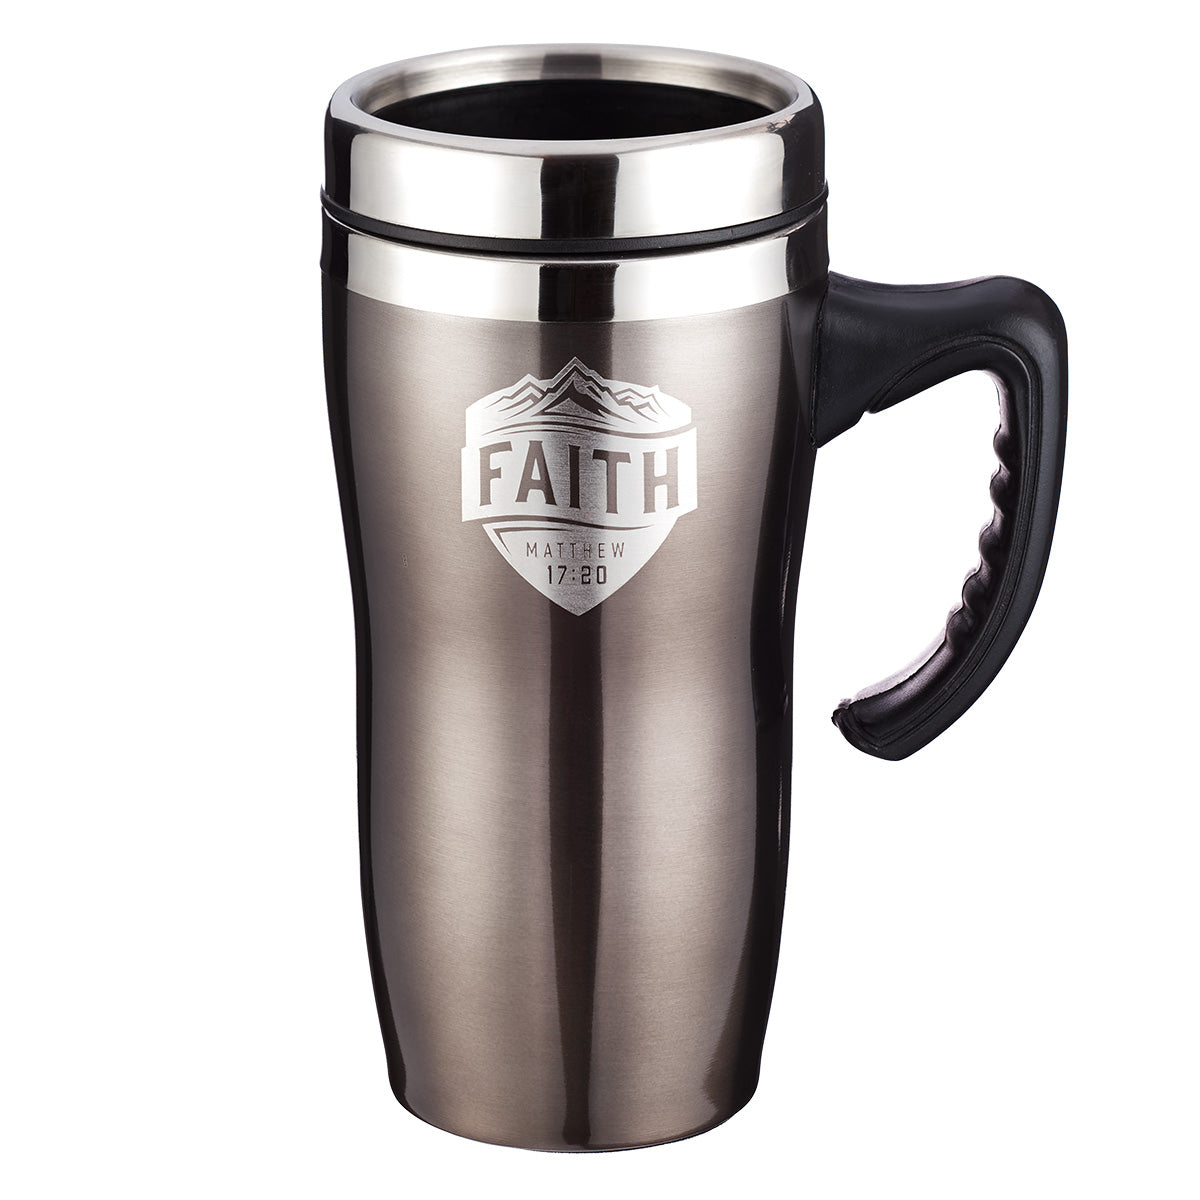 Image of Faith Stainless Steel Travel Mug With Handle  - Matthew 17:20 other